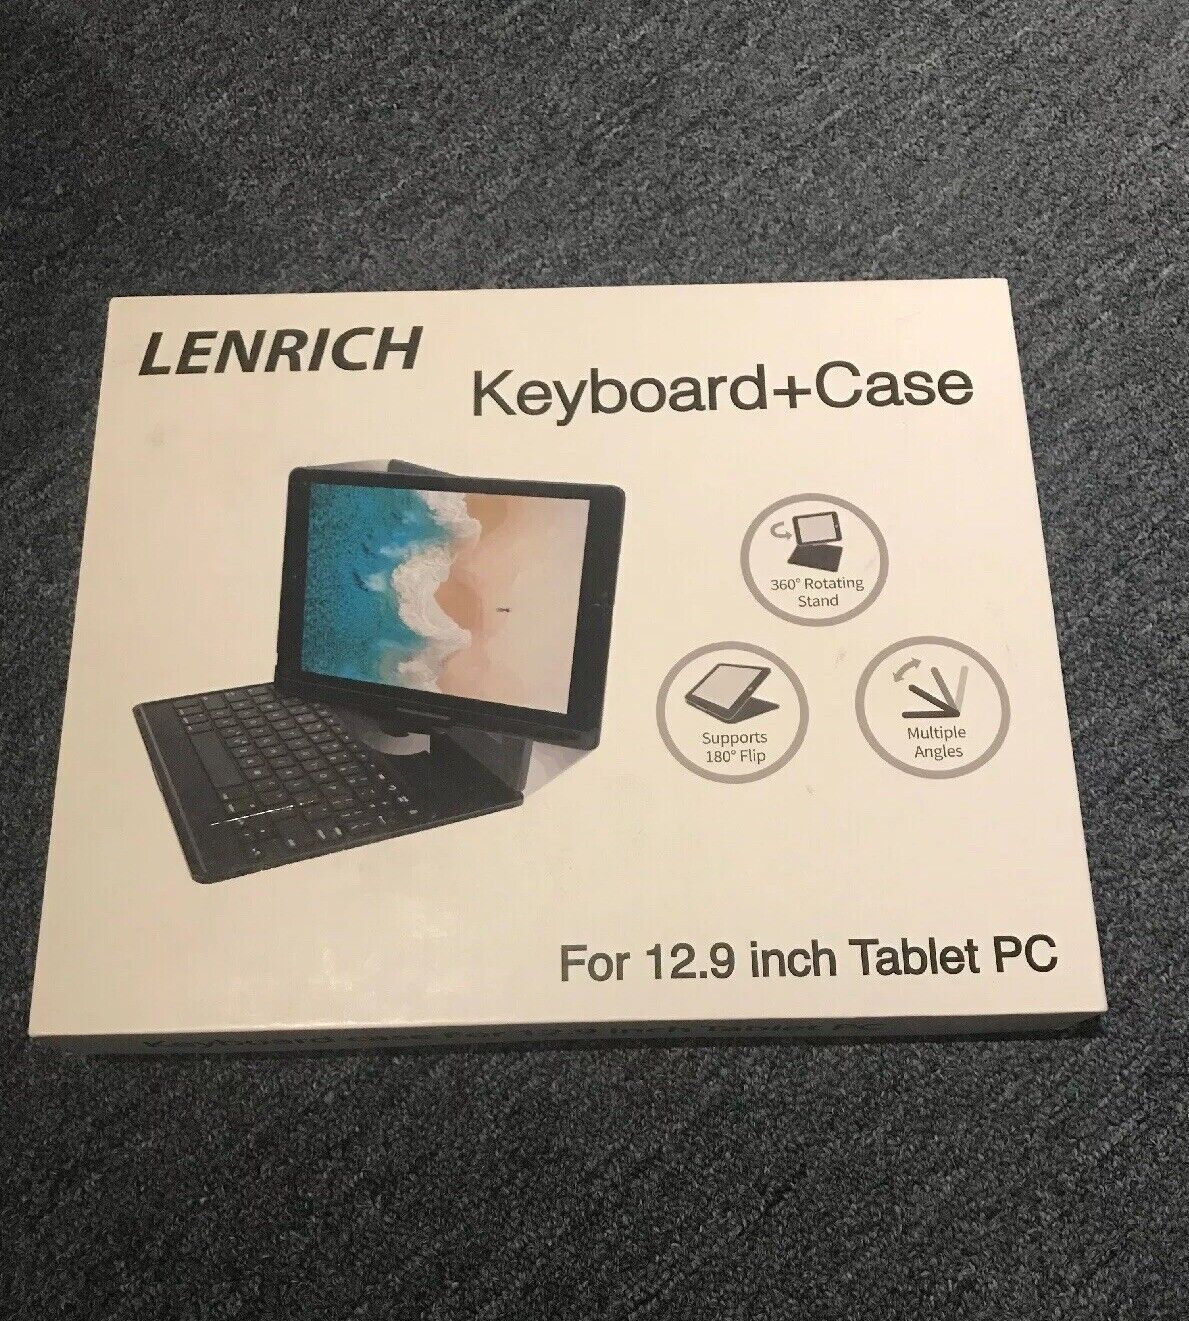 LENRICH Keyboard+Case For 12.9 Inch Tablet PC, Black (Charger Not Included)